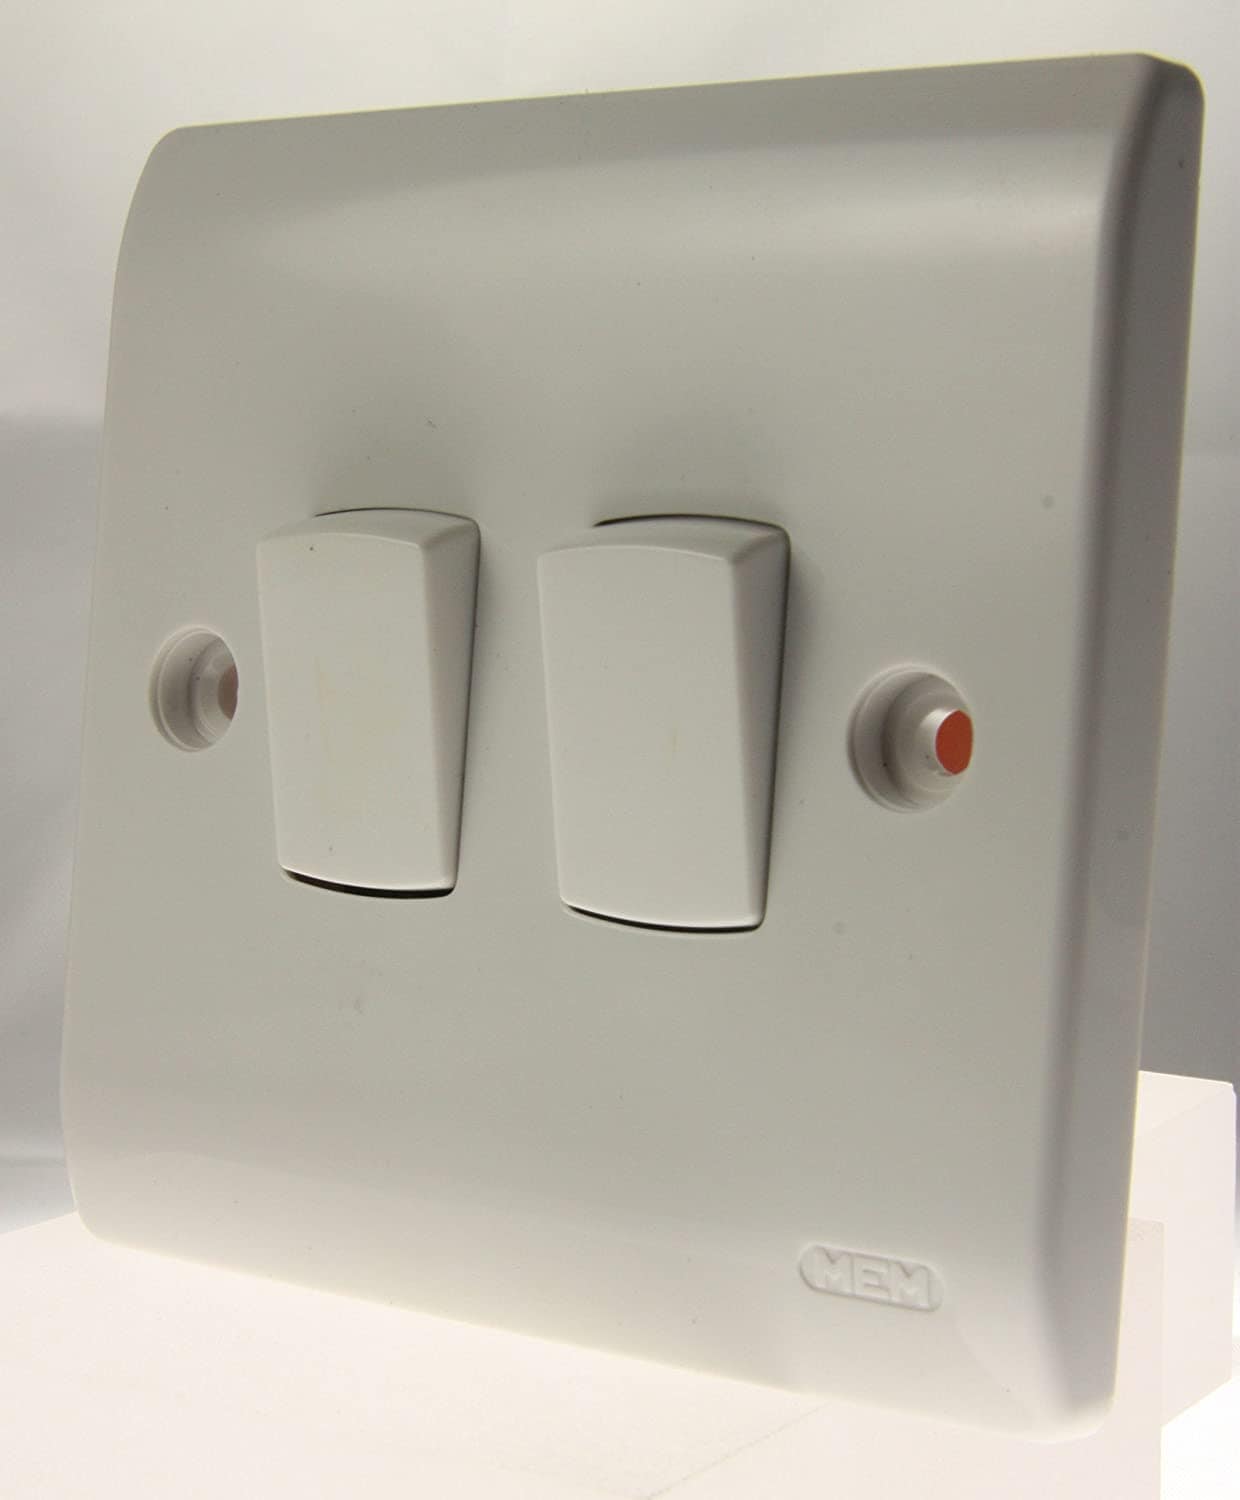 Eaton-MEM 2-Gang 2-Way 10A Light Switch | Supply Master | Accra, Ghana Switches & Sockets Buy Tools hardware Building materials